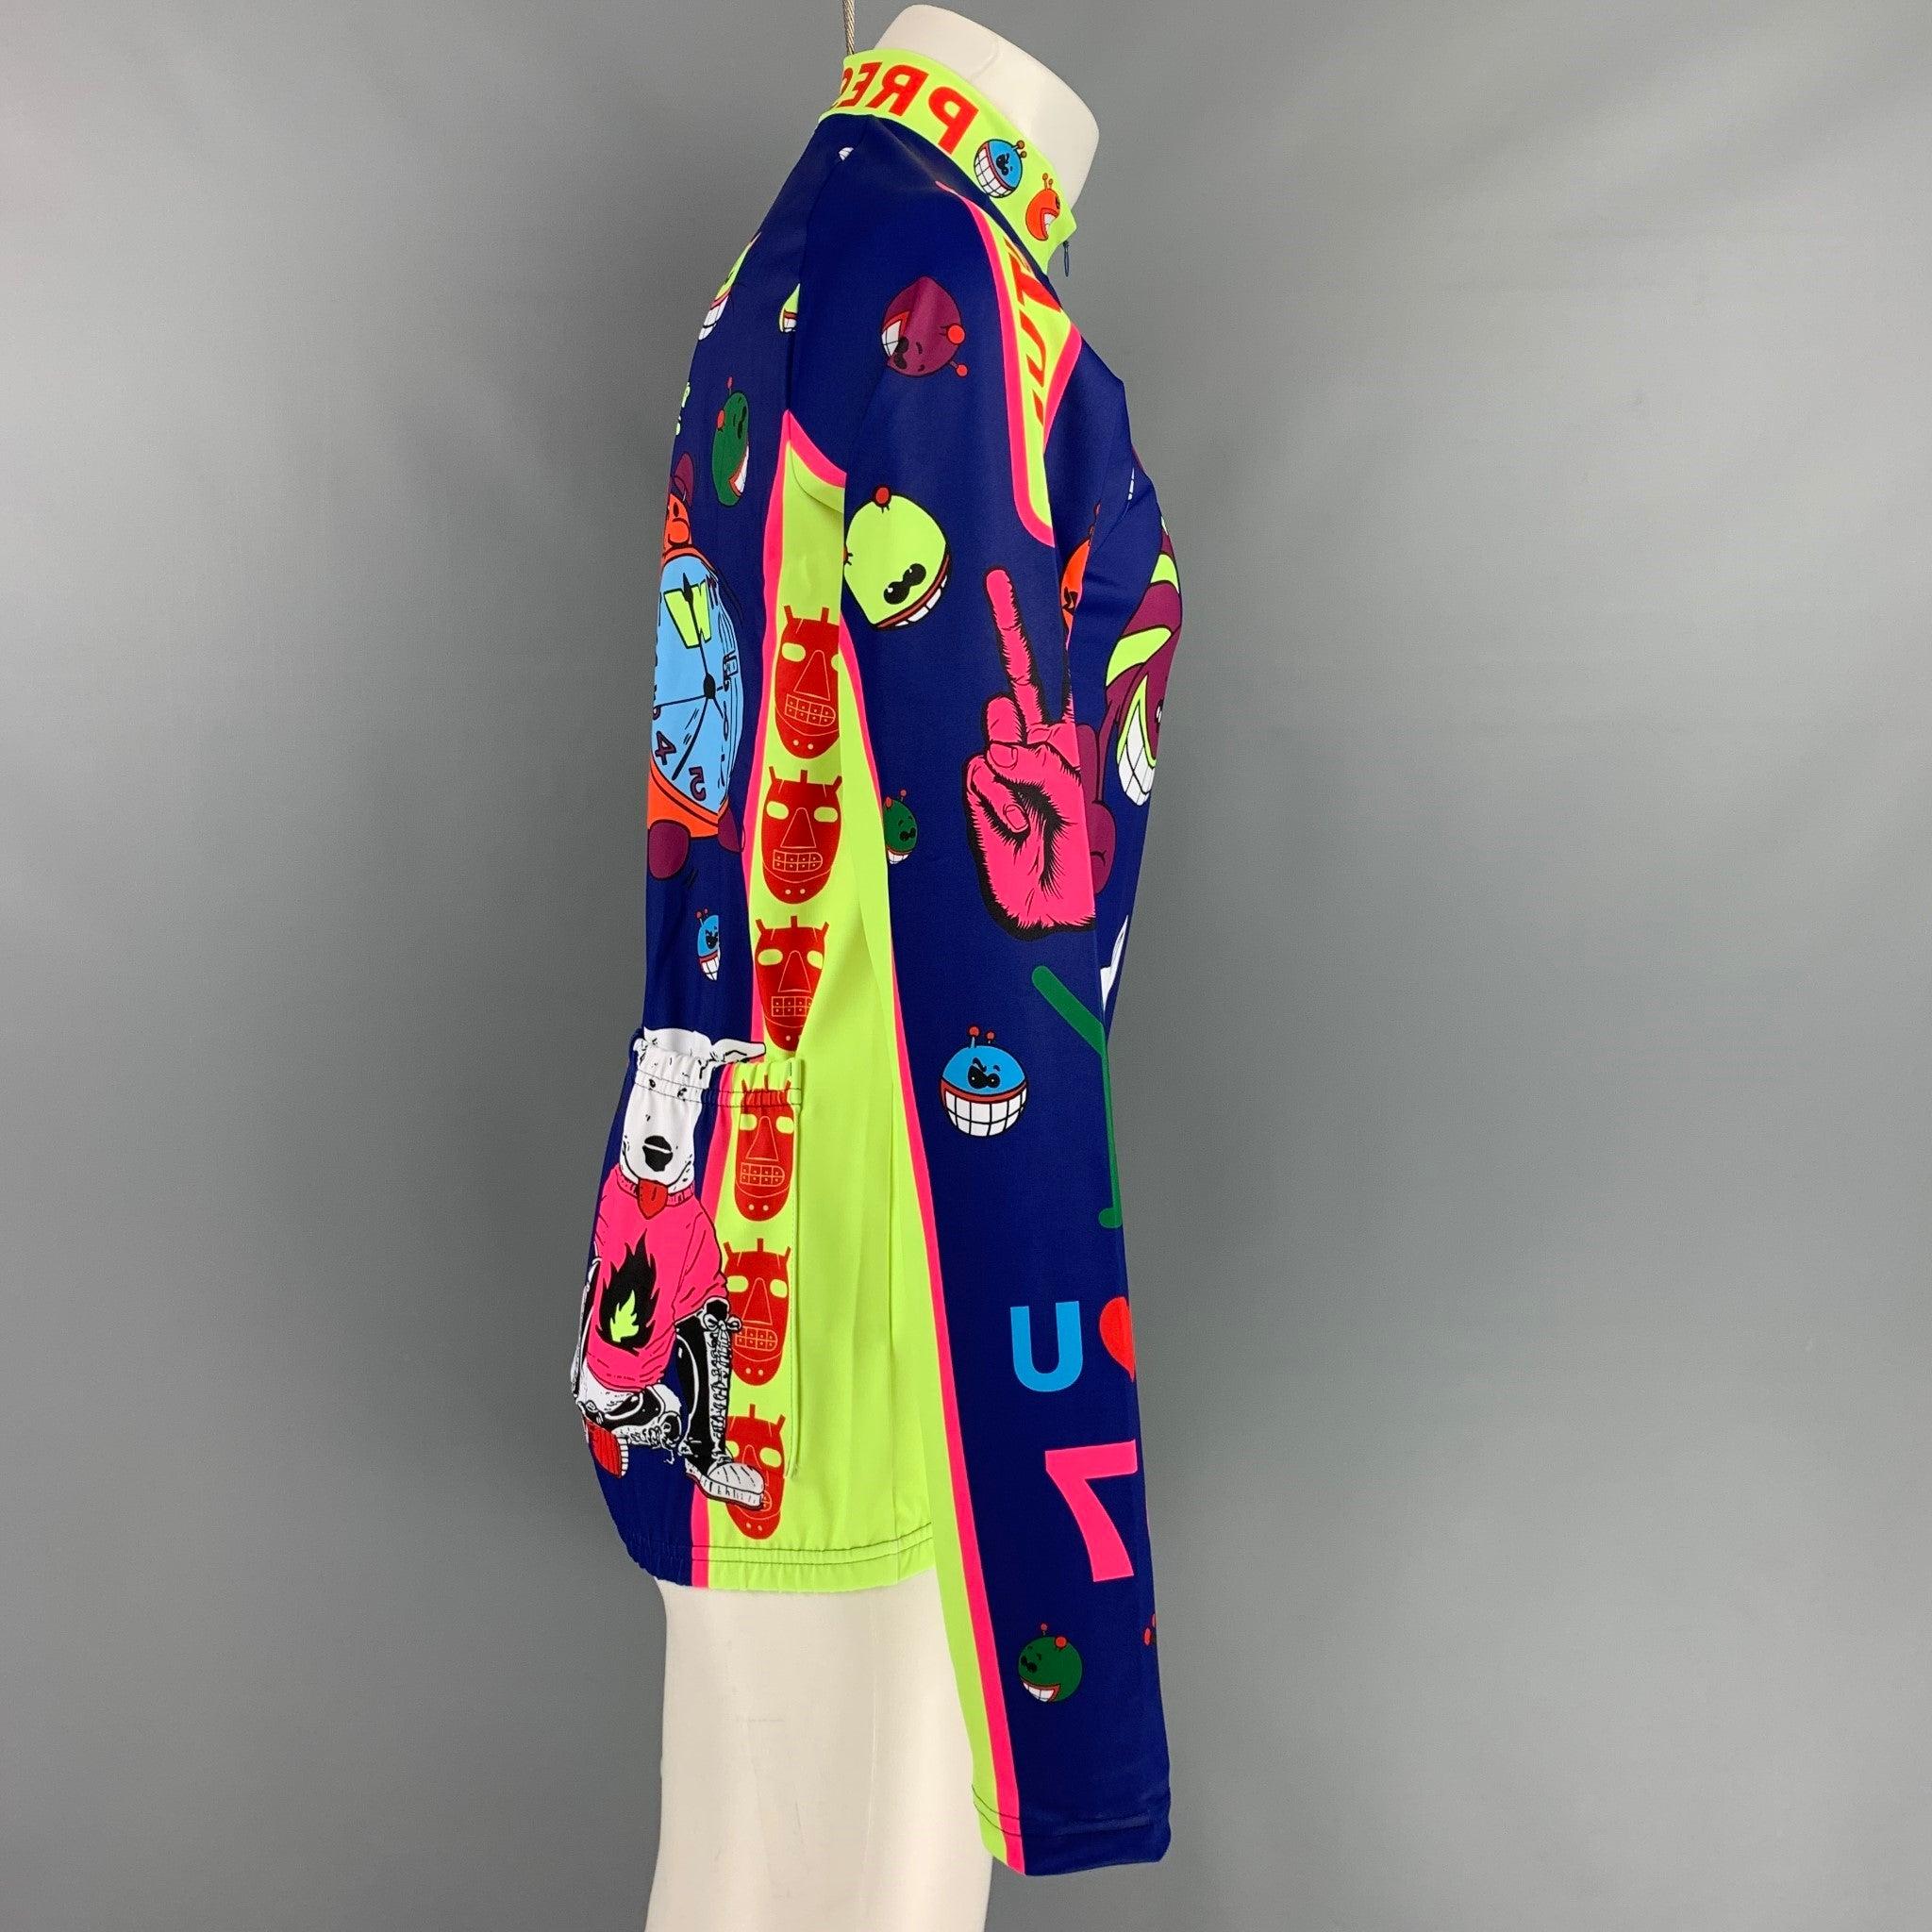 Walter Van Beirendonck Cycle Biker Jersey Pullover Top from Fall Winter 2021 Future Proof collection. Features a quarter zip graphic print design, collar and back pockets.Introduced as part of Walter Van Beirendonck’s W< collections during the early